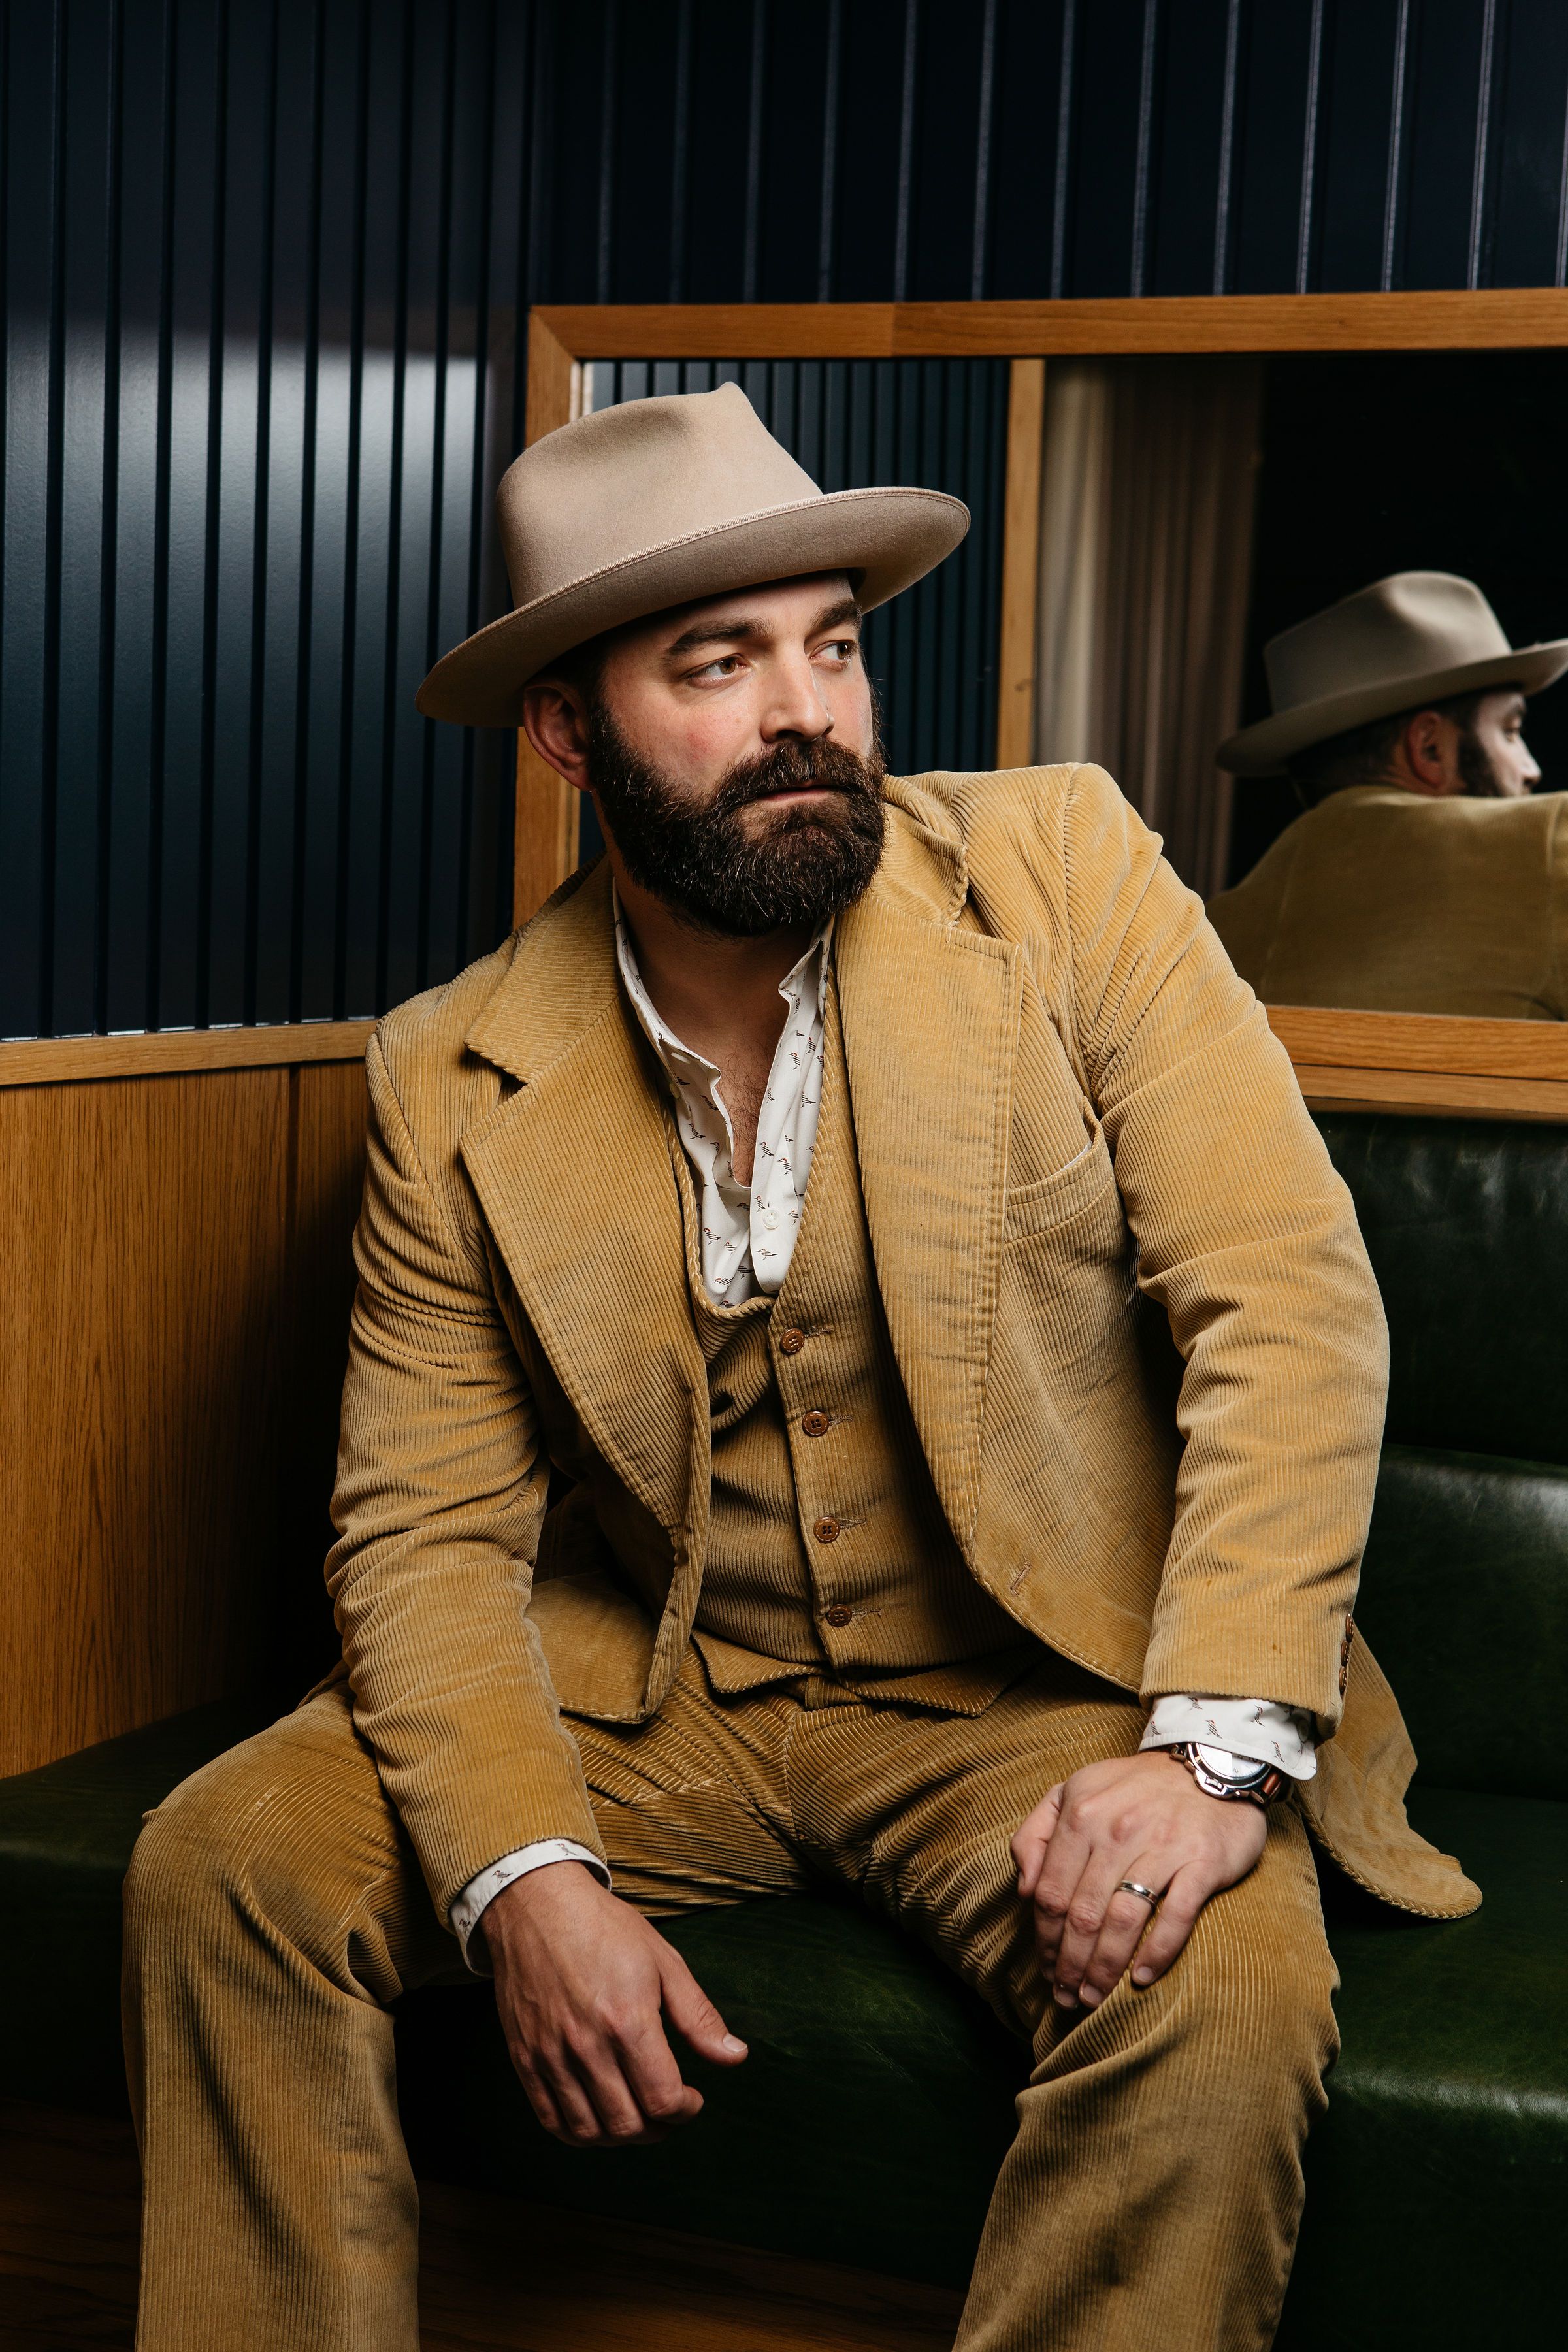 117: Talking Whiskey with Singer-Songwriter Drew Holcomb